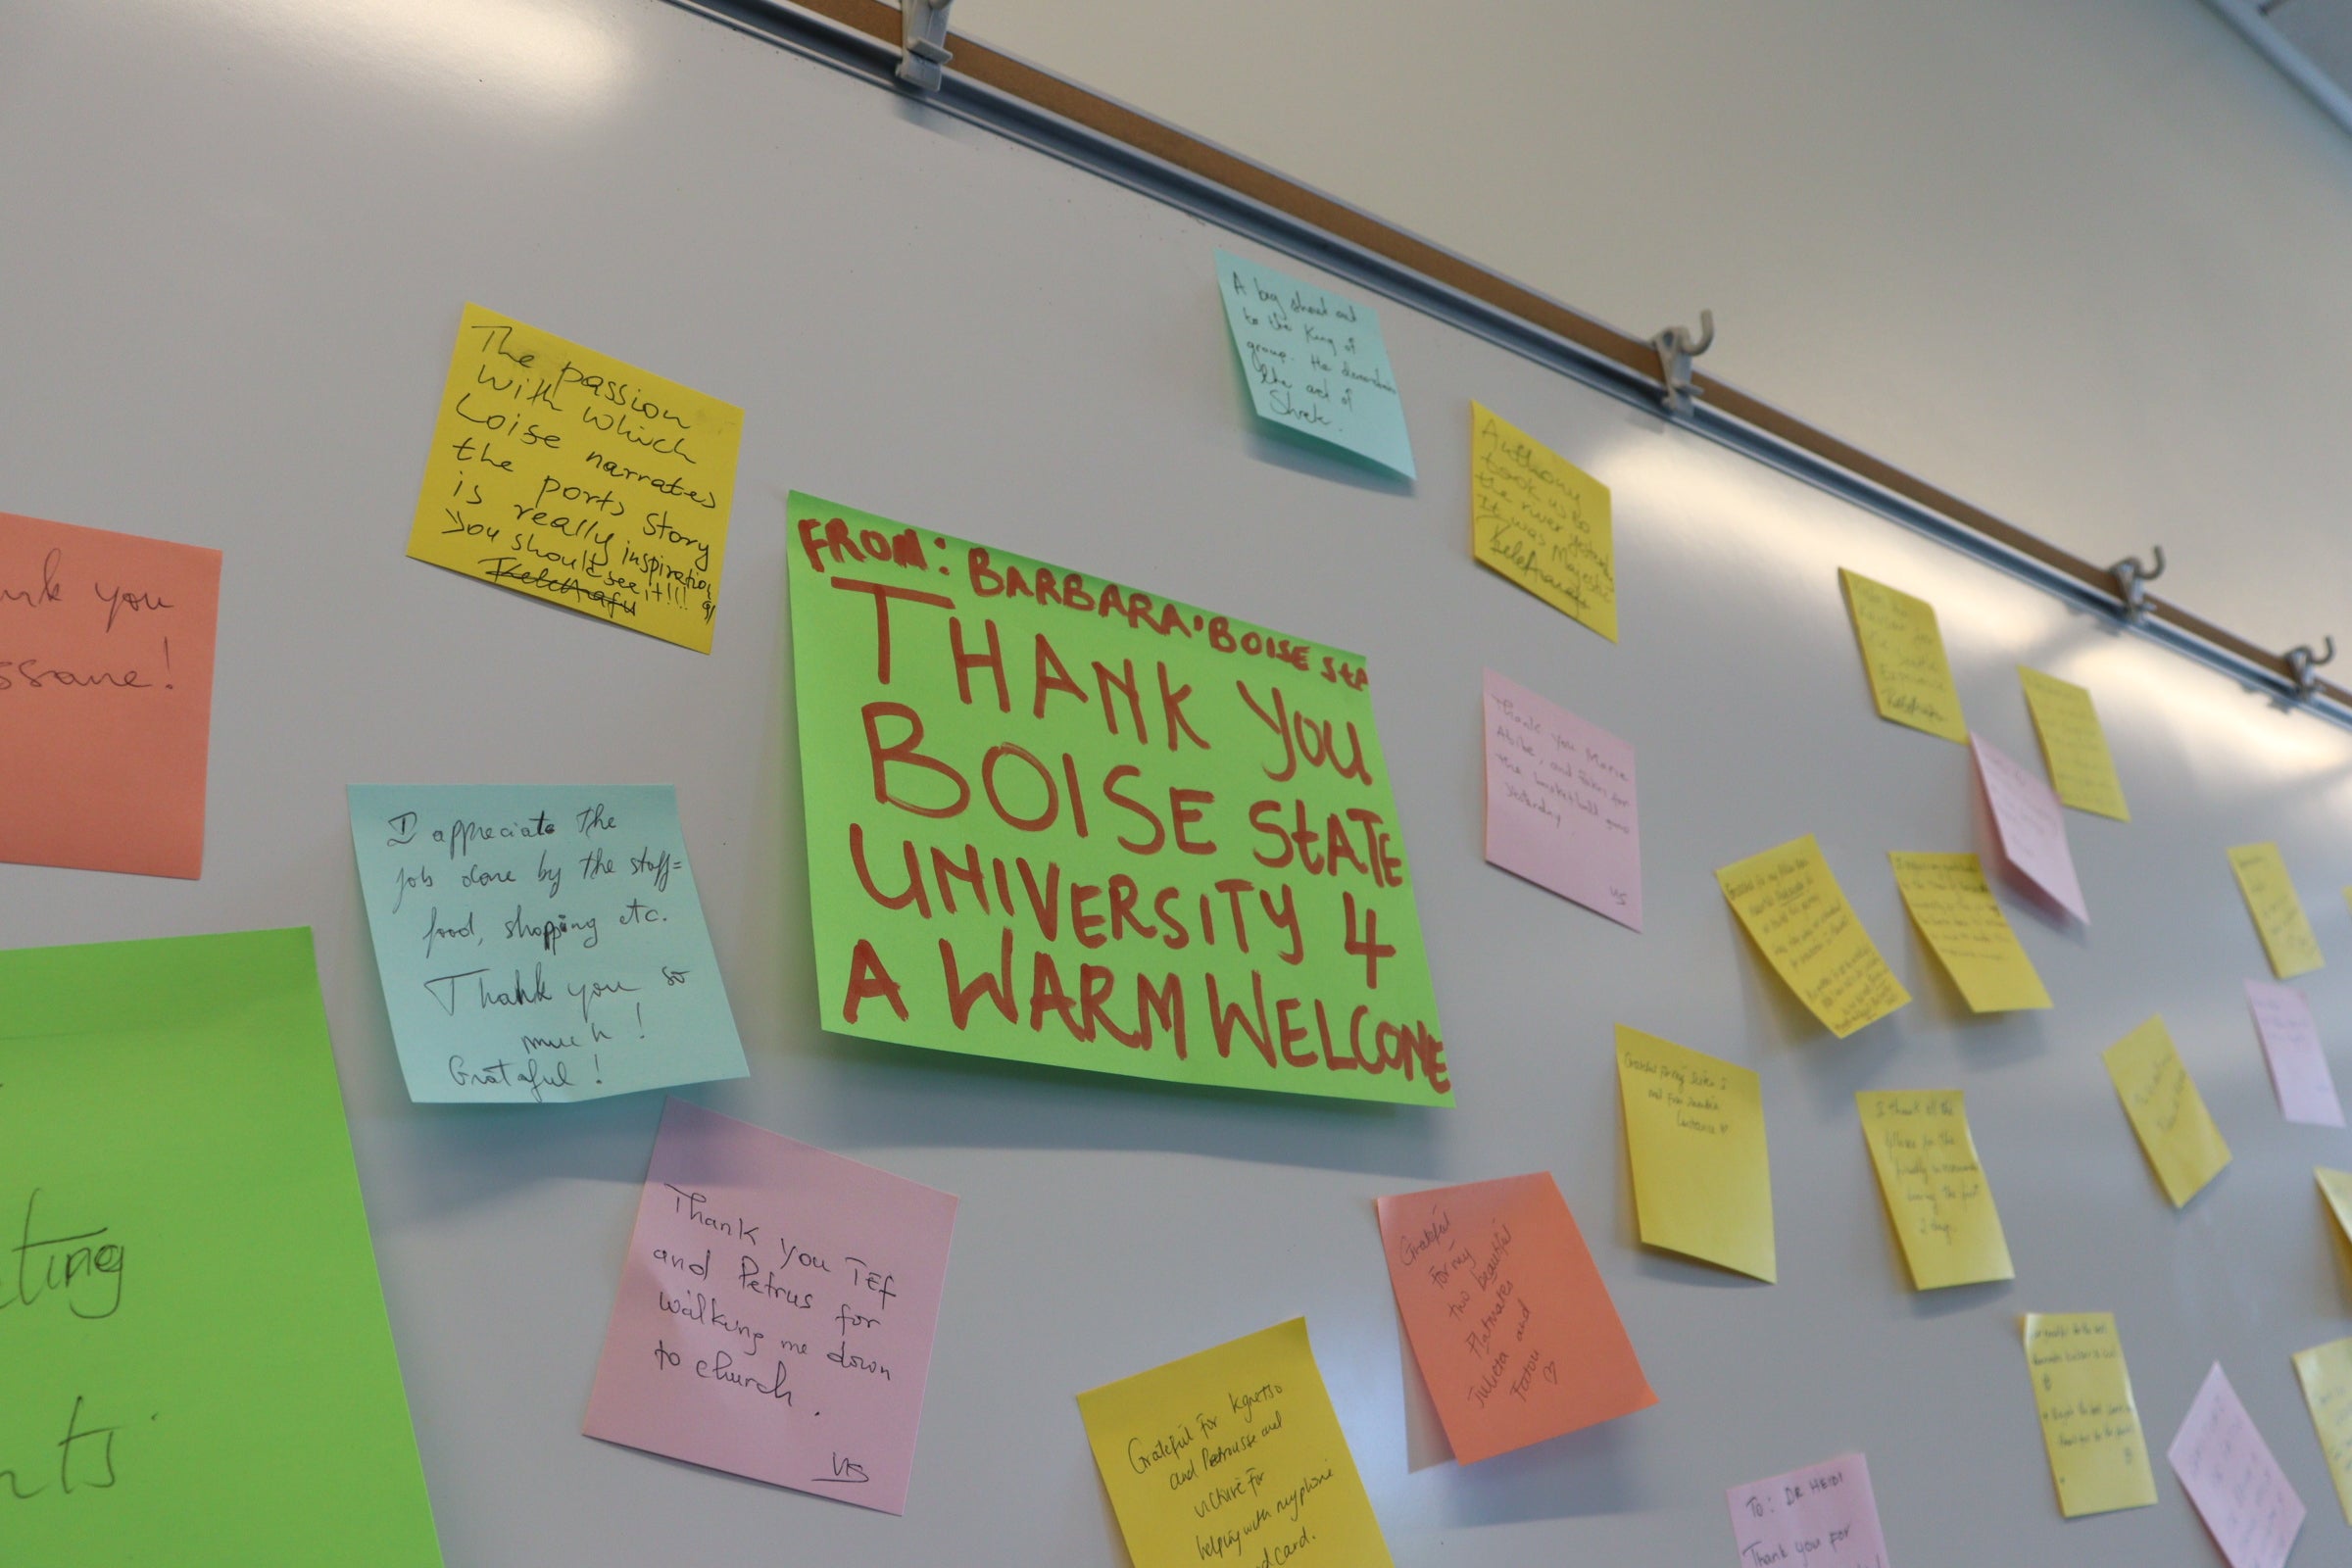 Image of sticky notes with welcoming messages on a whiteboard